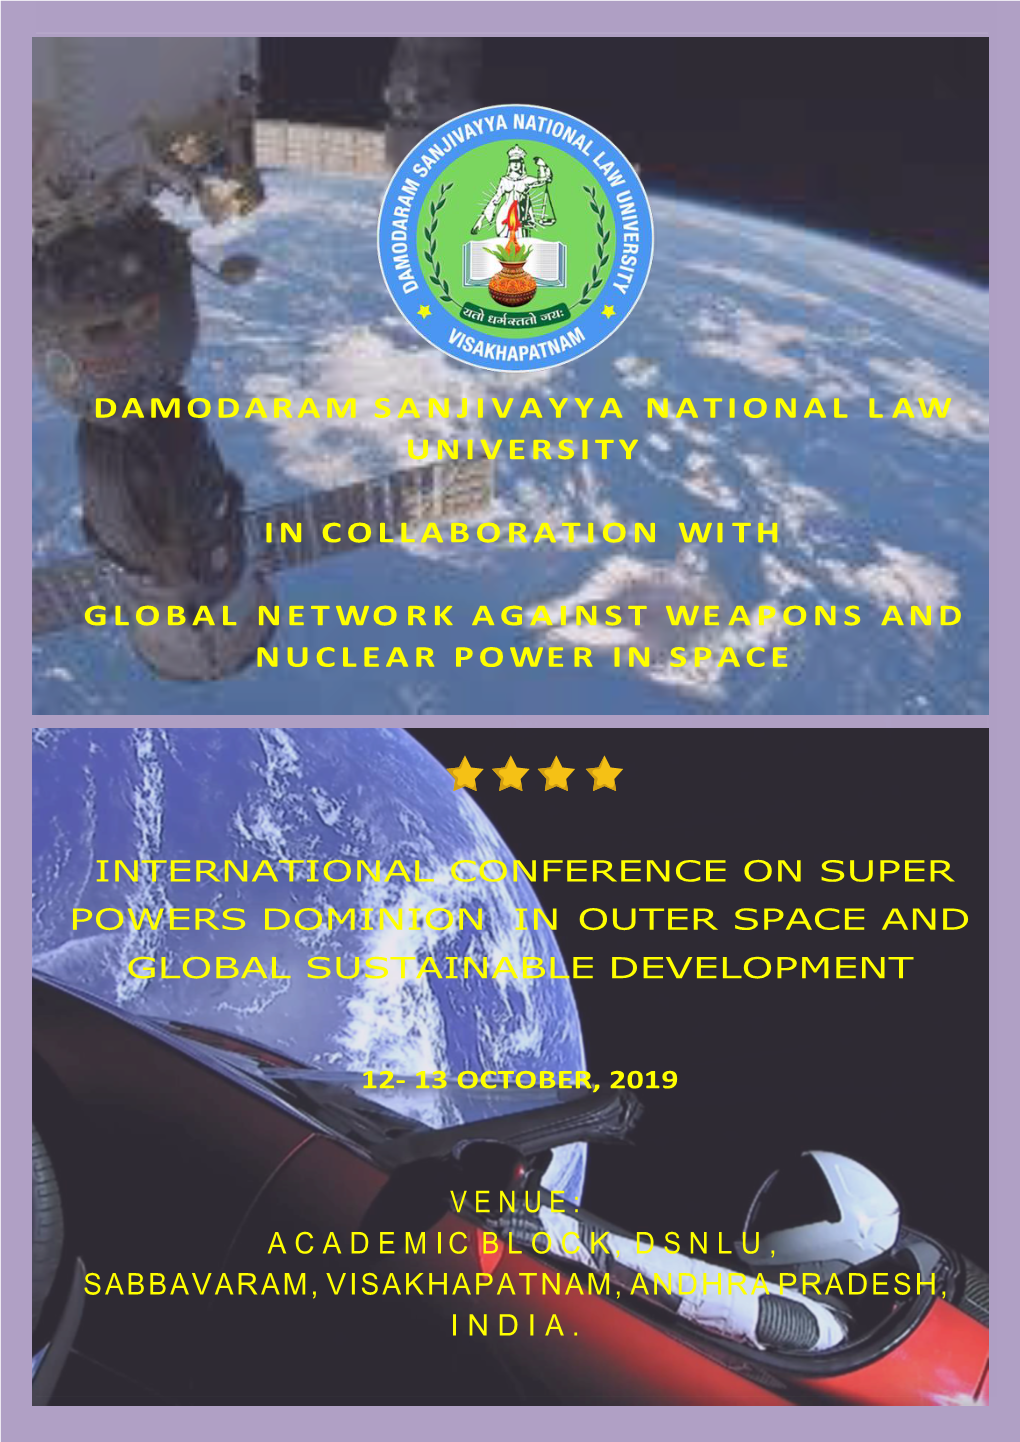 International Conference on Super Powers Dominion in Outer Space and Global Sustainable Development